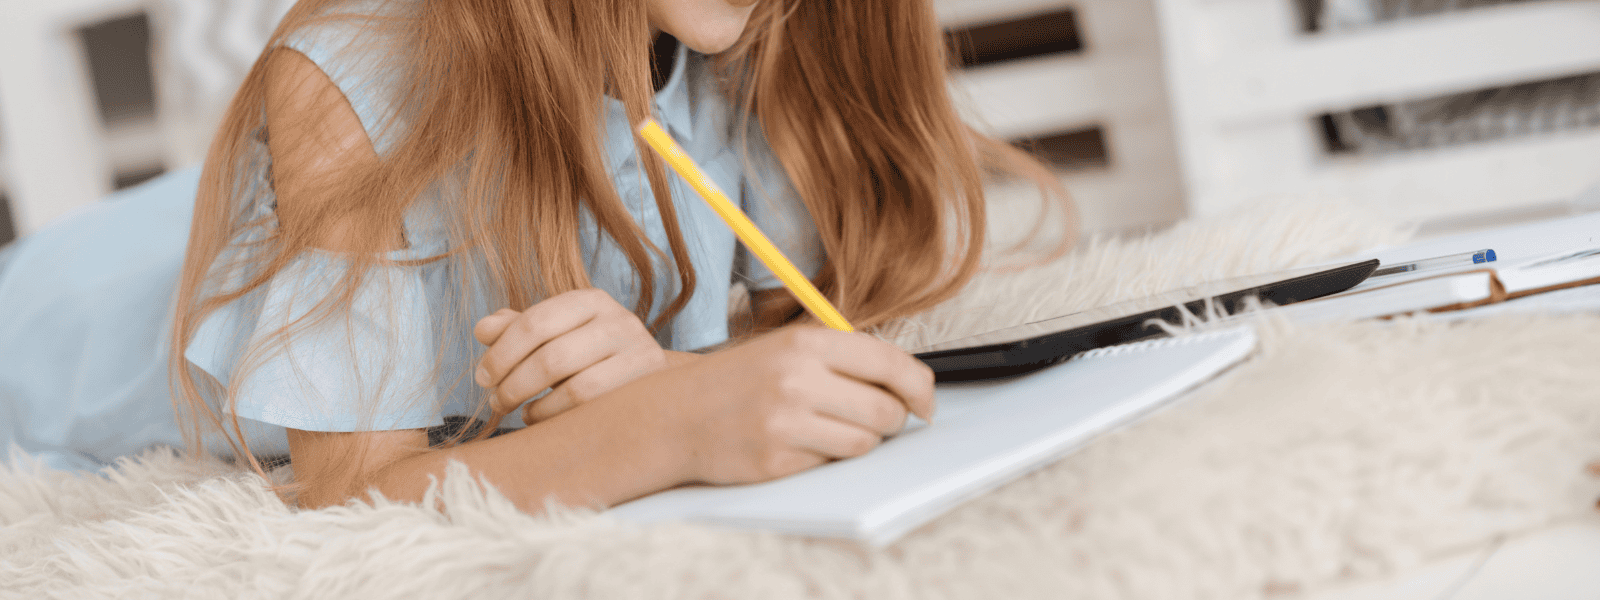 Why is Writing Such an Important Skill for Kids to Practice?